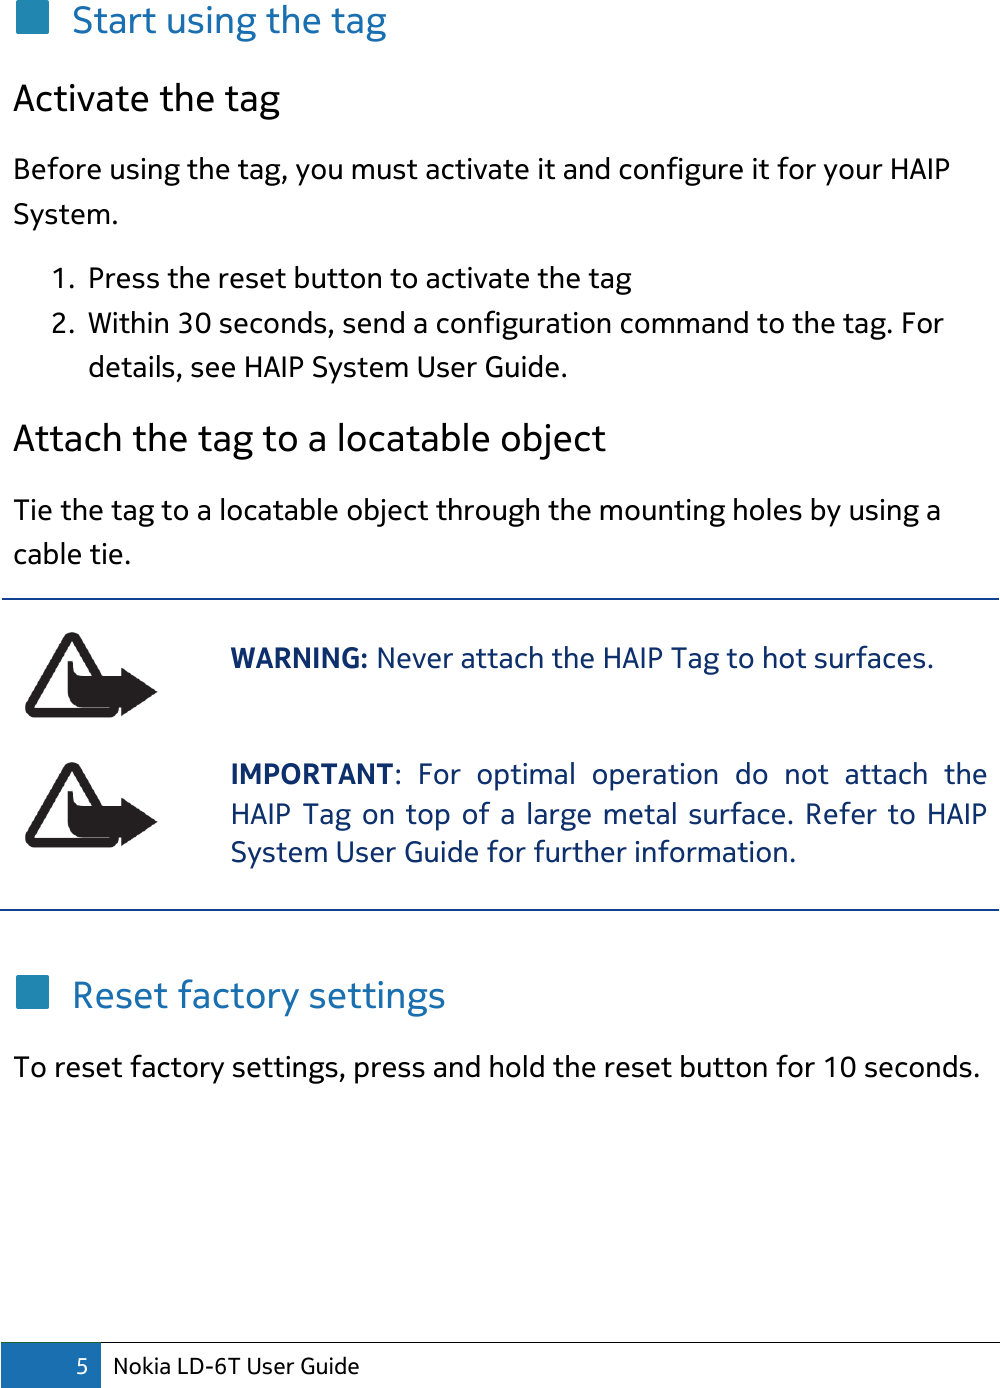 5 Nokia LD-6T User Guide  Start using the tag Activate the tag Before using the tag, you must activate it and configure it for your HAIP System. 1. Press the reset button to activate the tag 2. Within 30 seconds, send a configuration command to the tag. For details, see HAIP System User Guide. Attach the tag to a locatable object Tie the tag to a locatable object through the mounting holes by using a cable tie.  WARNING: Never attach the HAIP Tag to hot surfaces.   IMPORTANT:  For  optimal  operation  do  not  attach  the HAIP Tag on top of a large metal surface. Refer to HAIP System User Guide for further information.   Reset factory settings To reset factory settings, press and hold the reset button for 10 seconds.   